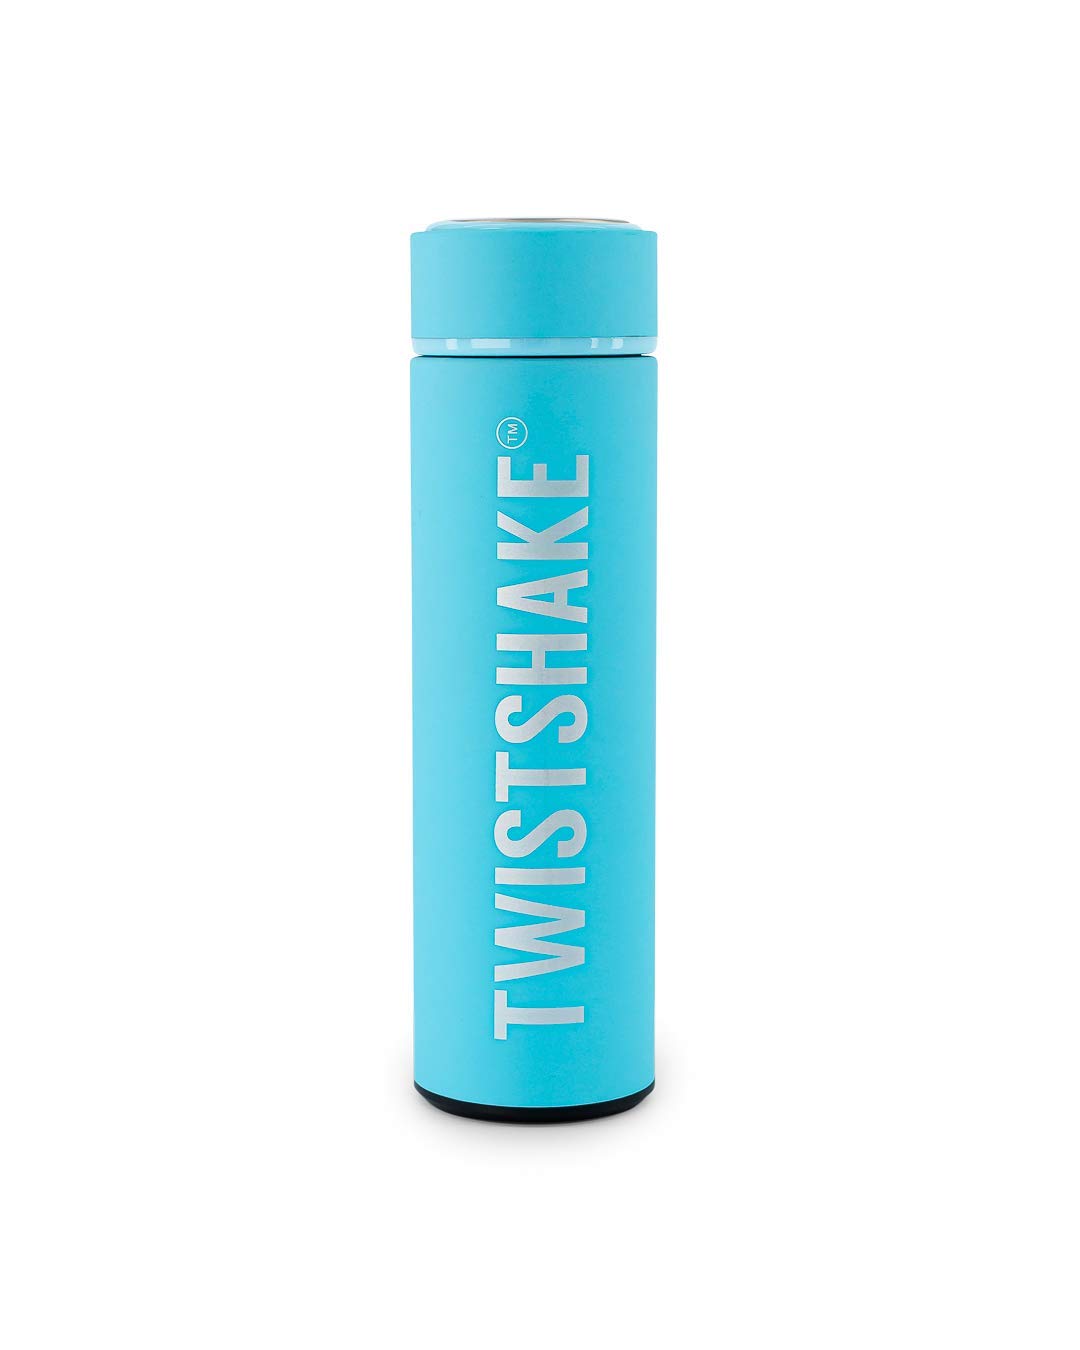 Vital Innovations 78298 Twistshake Thermoflasche "Hot or Cold", blau